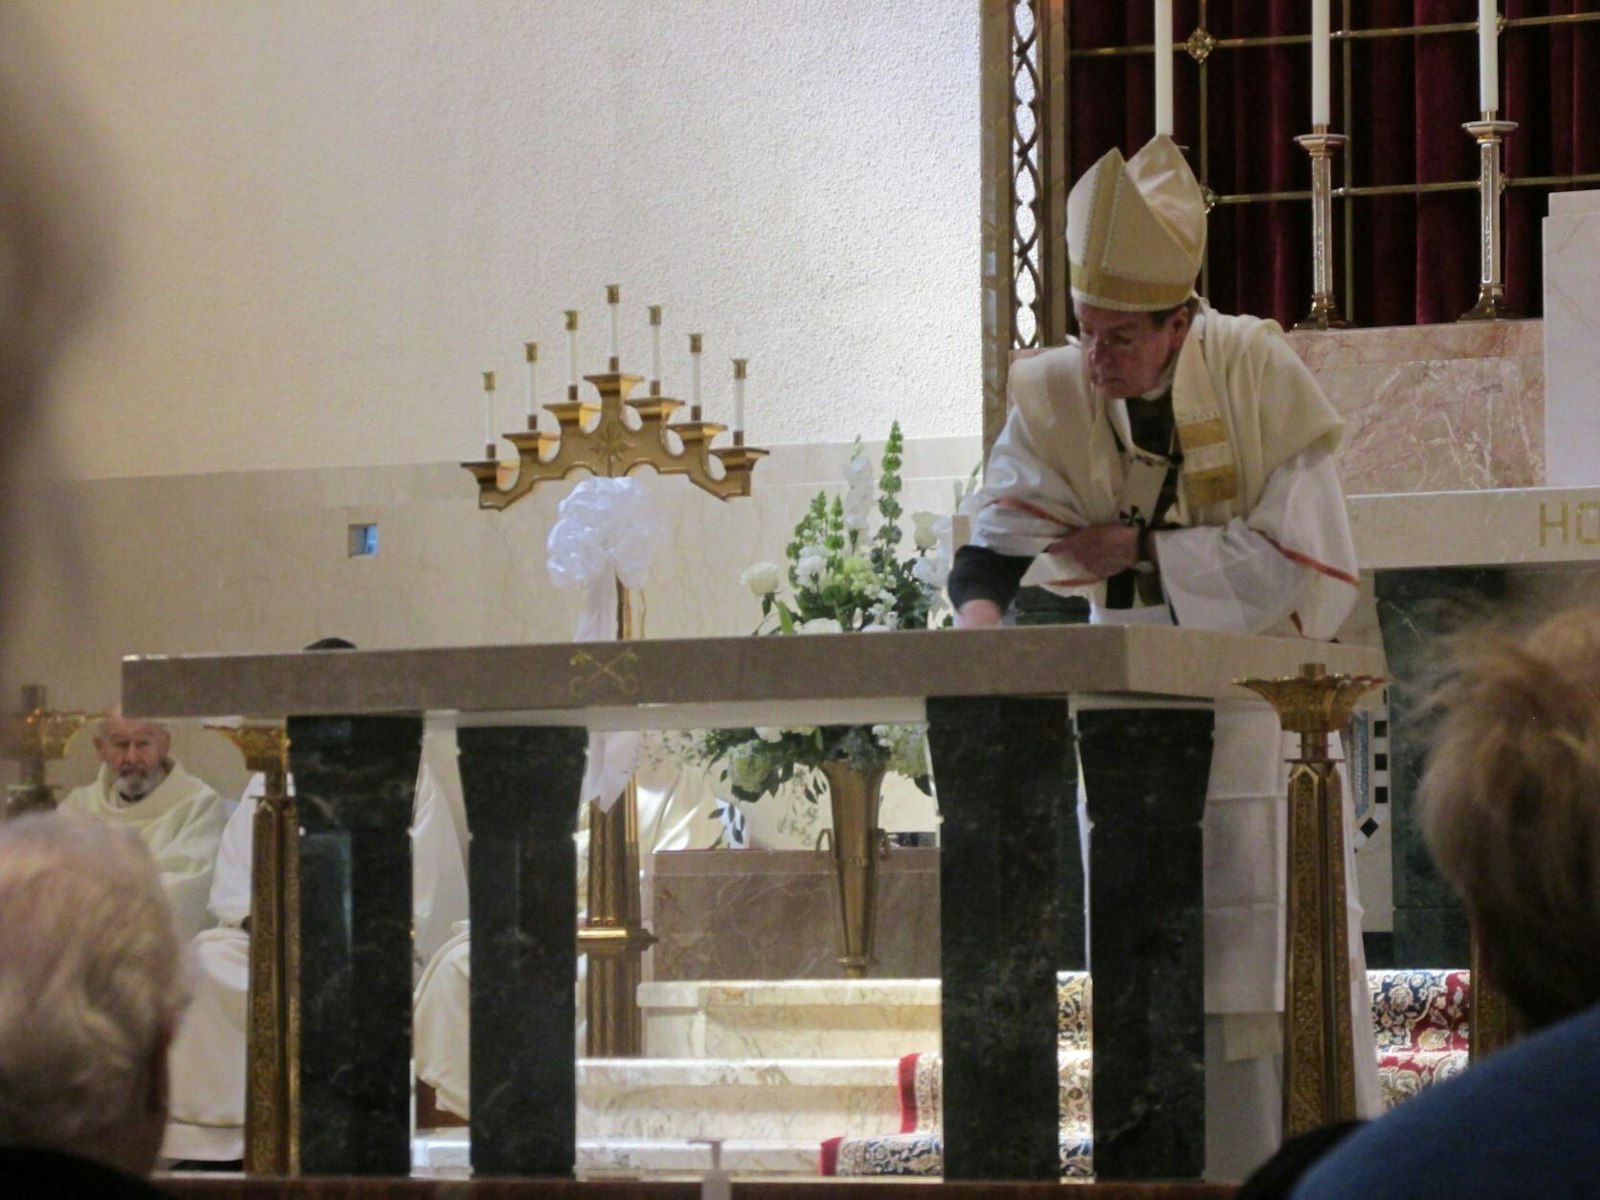 Archbishop Vigneron rubs chrism oil on the new altar at St. Peter Parish. The new altar contains relics of St. Thomas a’Becket and St. Elizabeth Anne Seton.